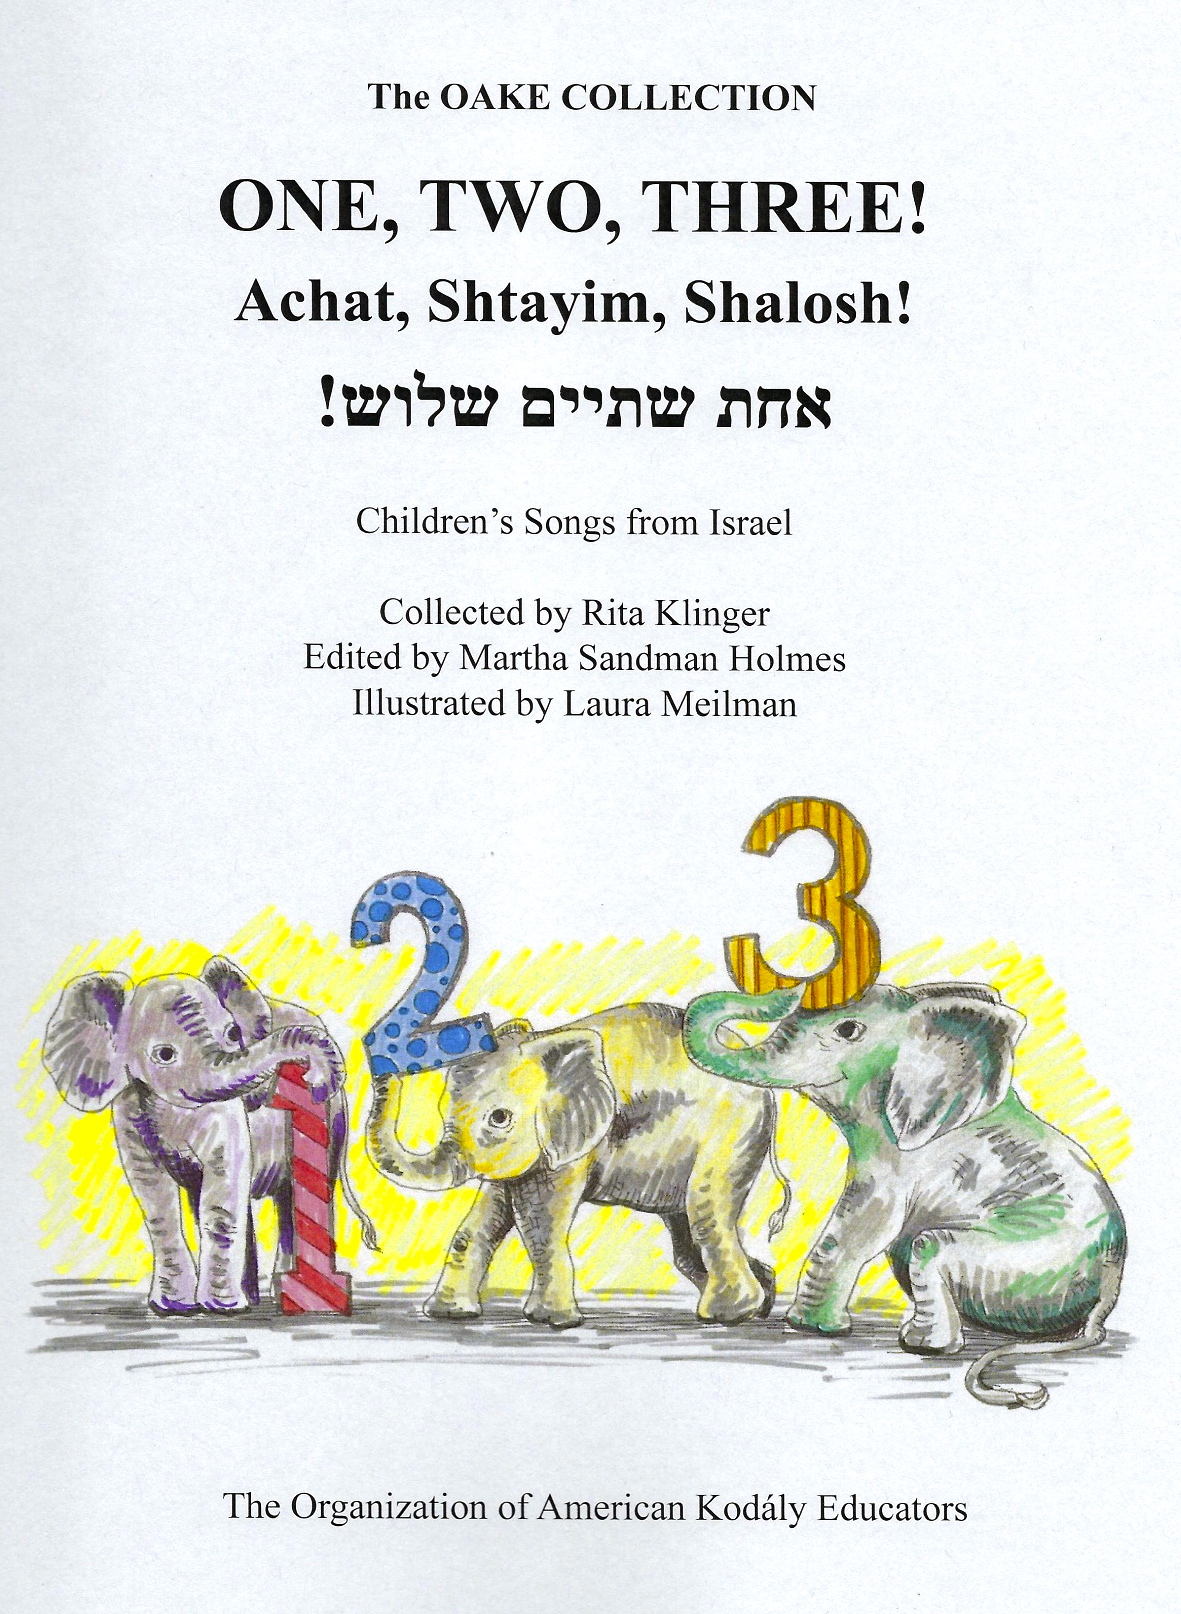 One, Two, Three! <br>Achat, Shtayim, Shalosh!<br>Children's Songs from Israel<br>Collected by Rita Klinger